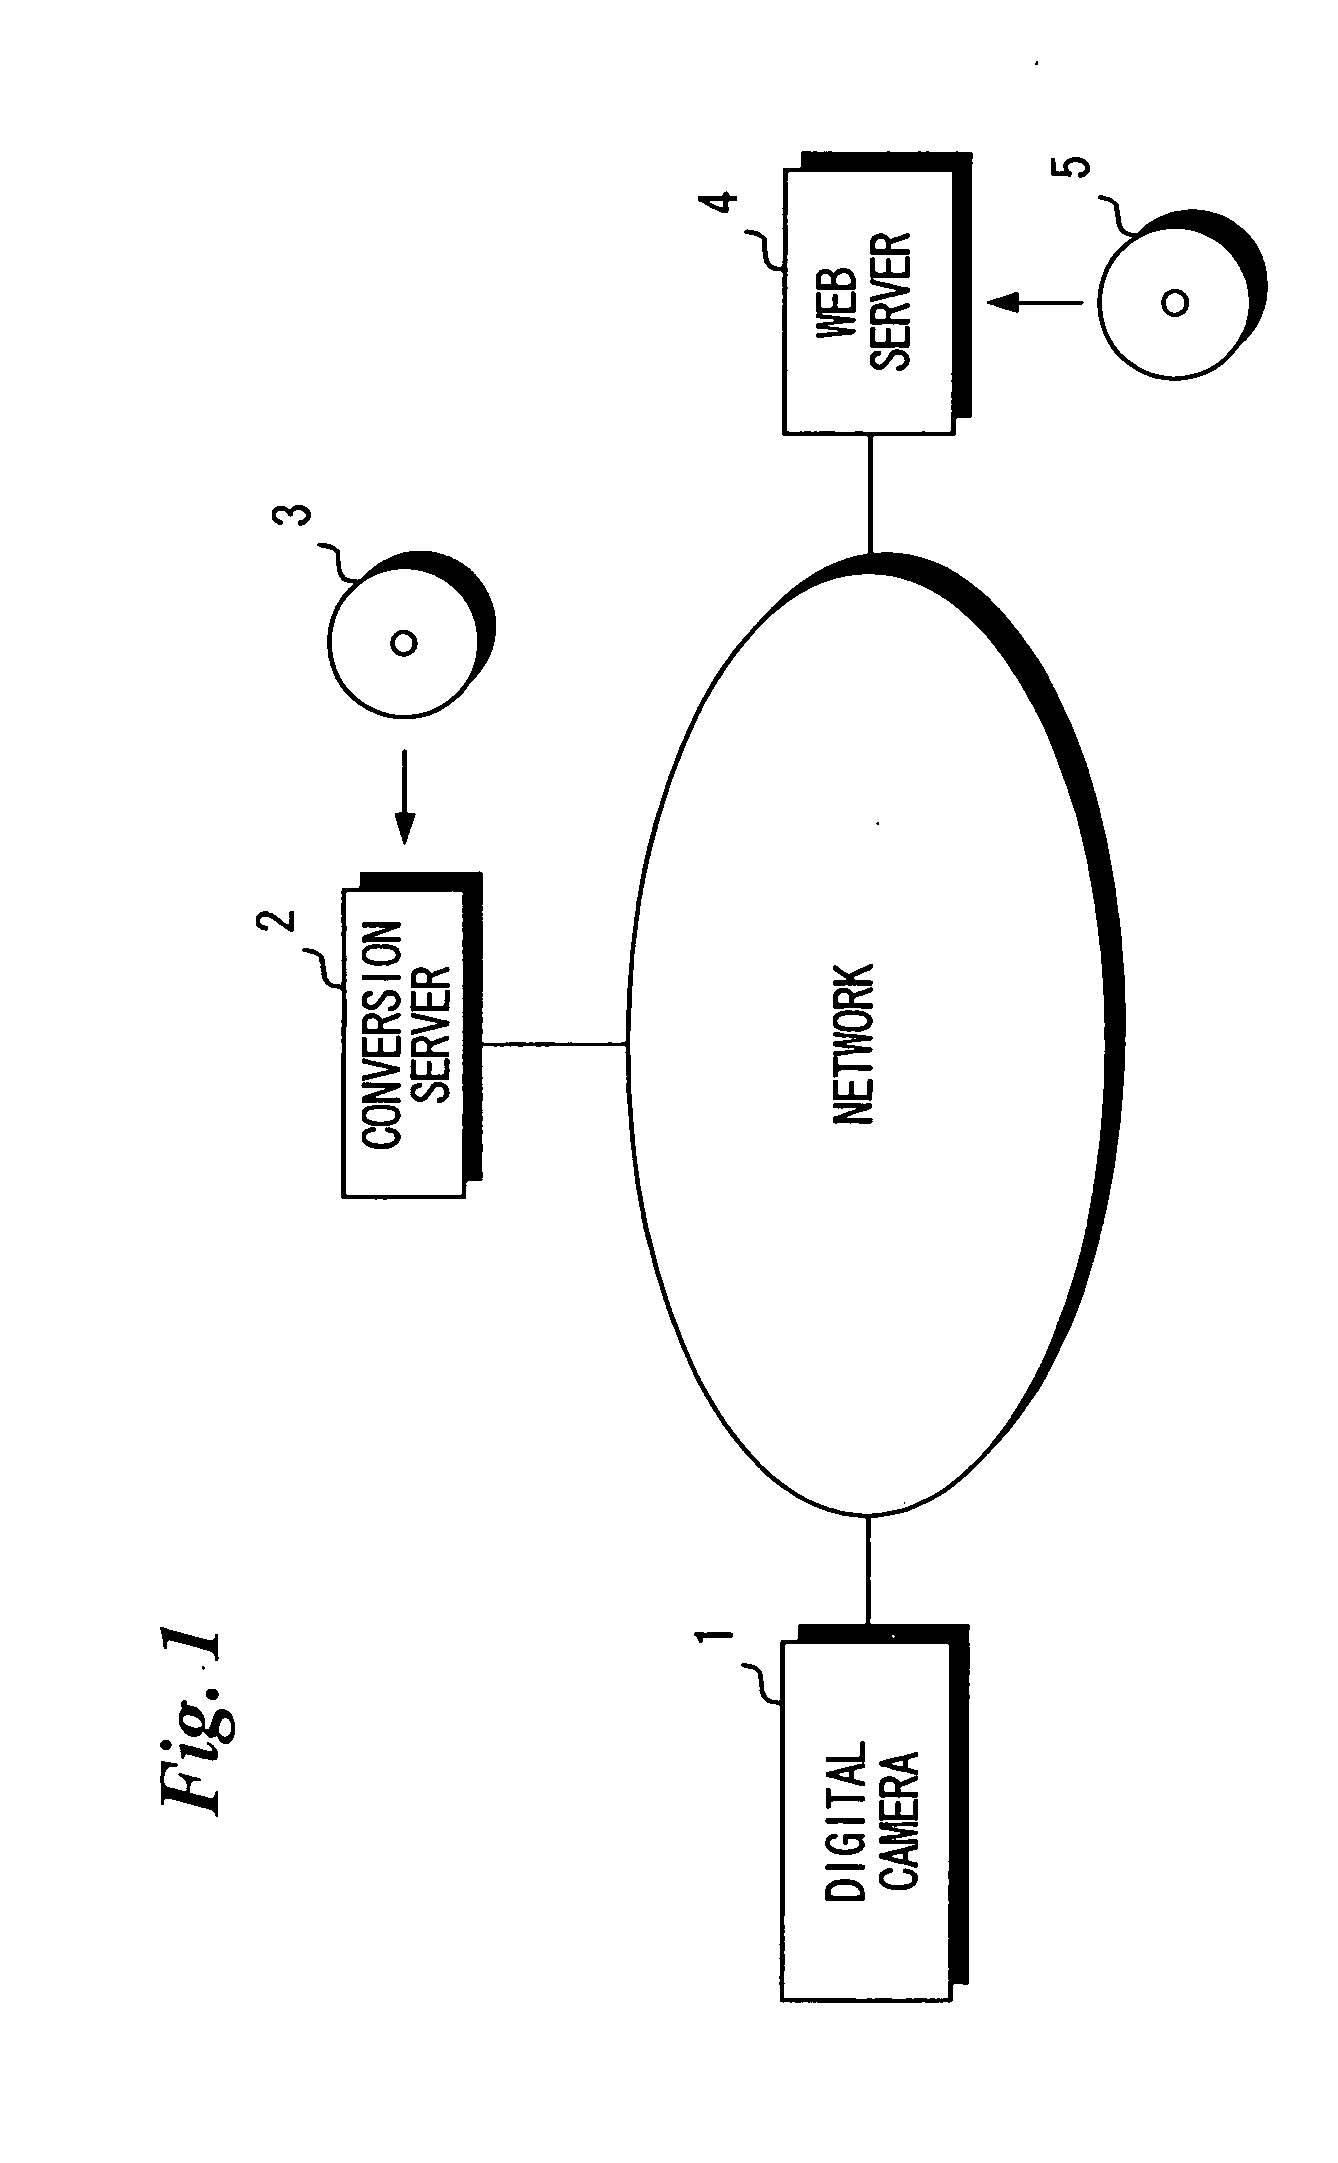 Web page display system, and image server and method of controlling the same